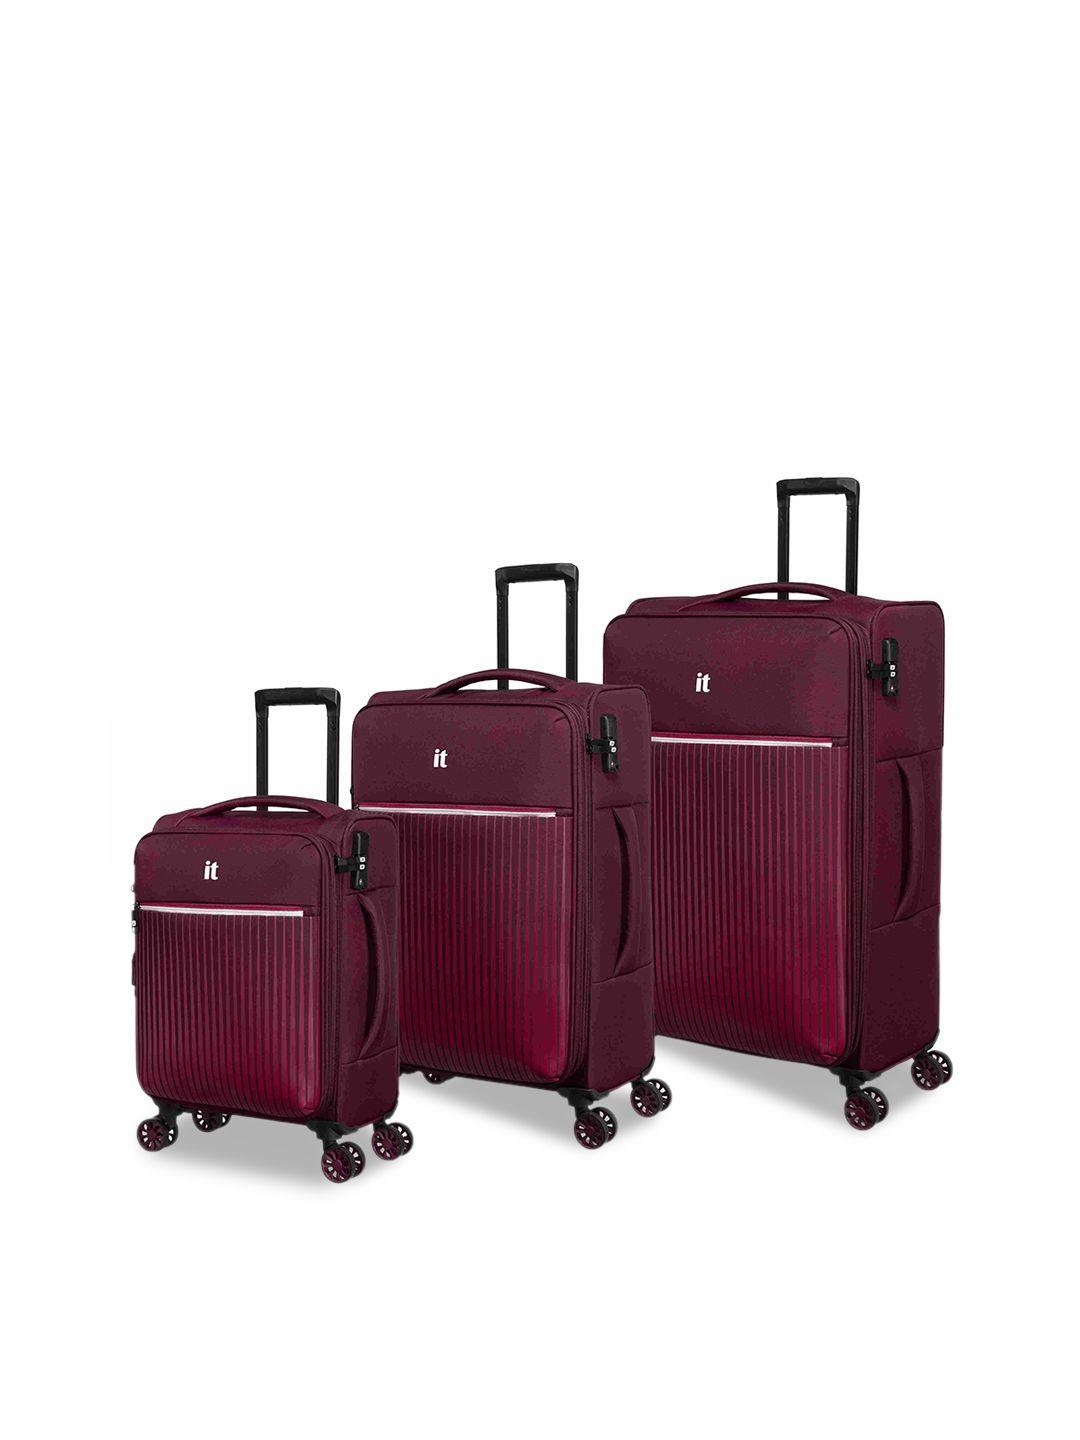 it luggage set of 3 striped soft-sided cabin, medium & large trolley suitcases